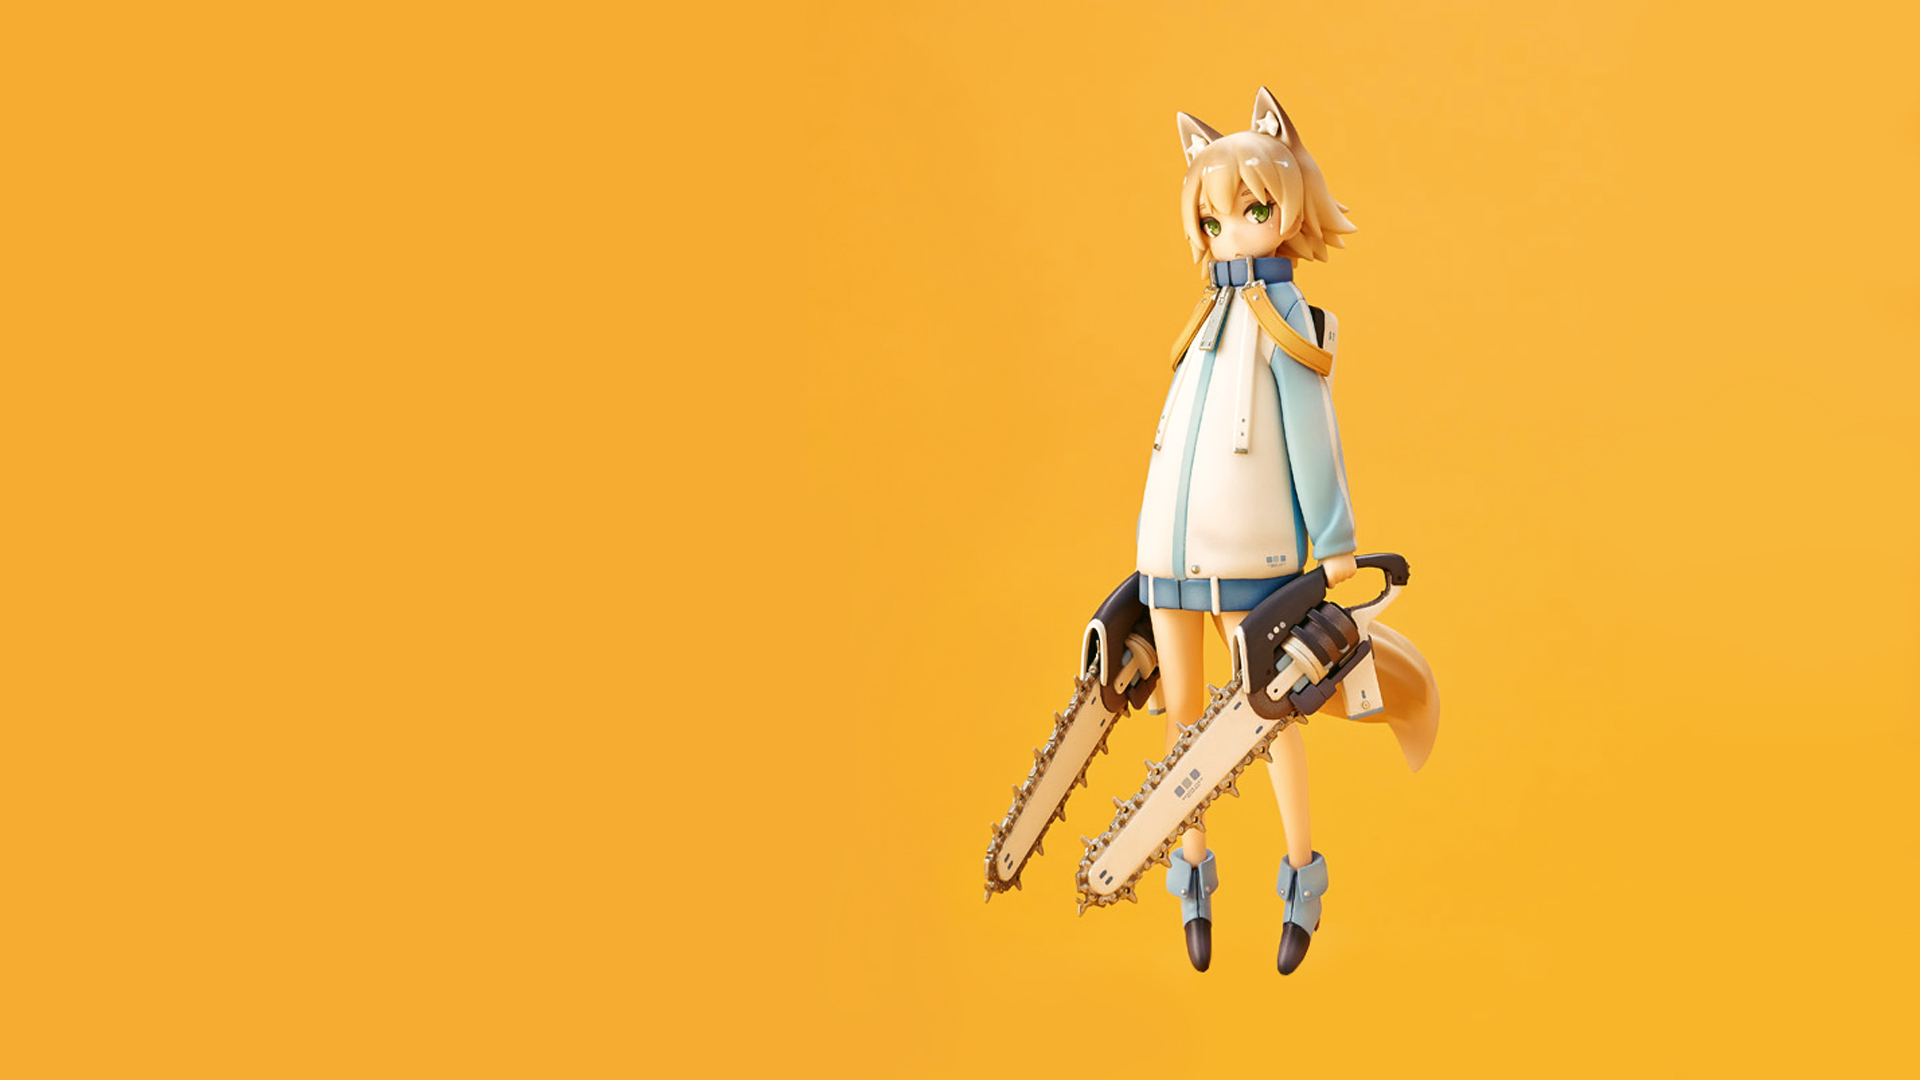 Anime 1920x1080 anime weapon yellow yellow background chainsaws cat ears